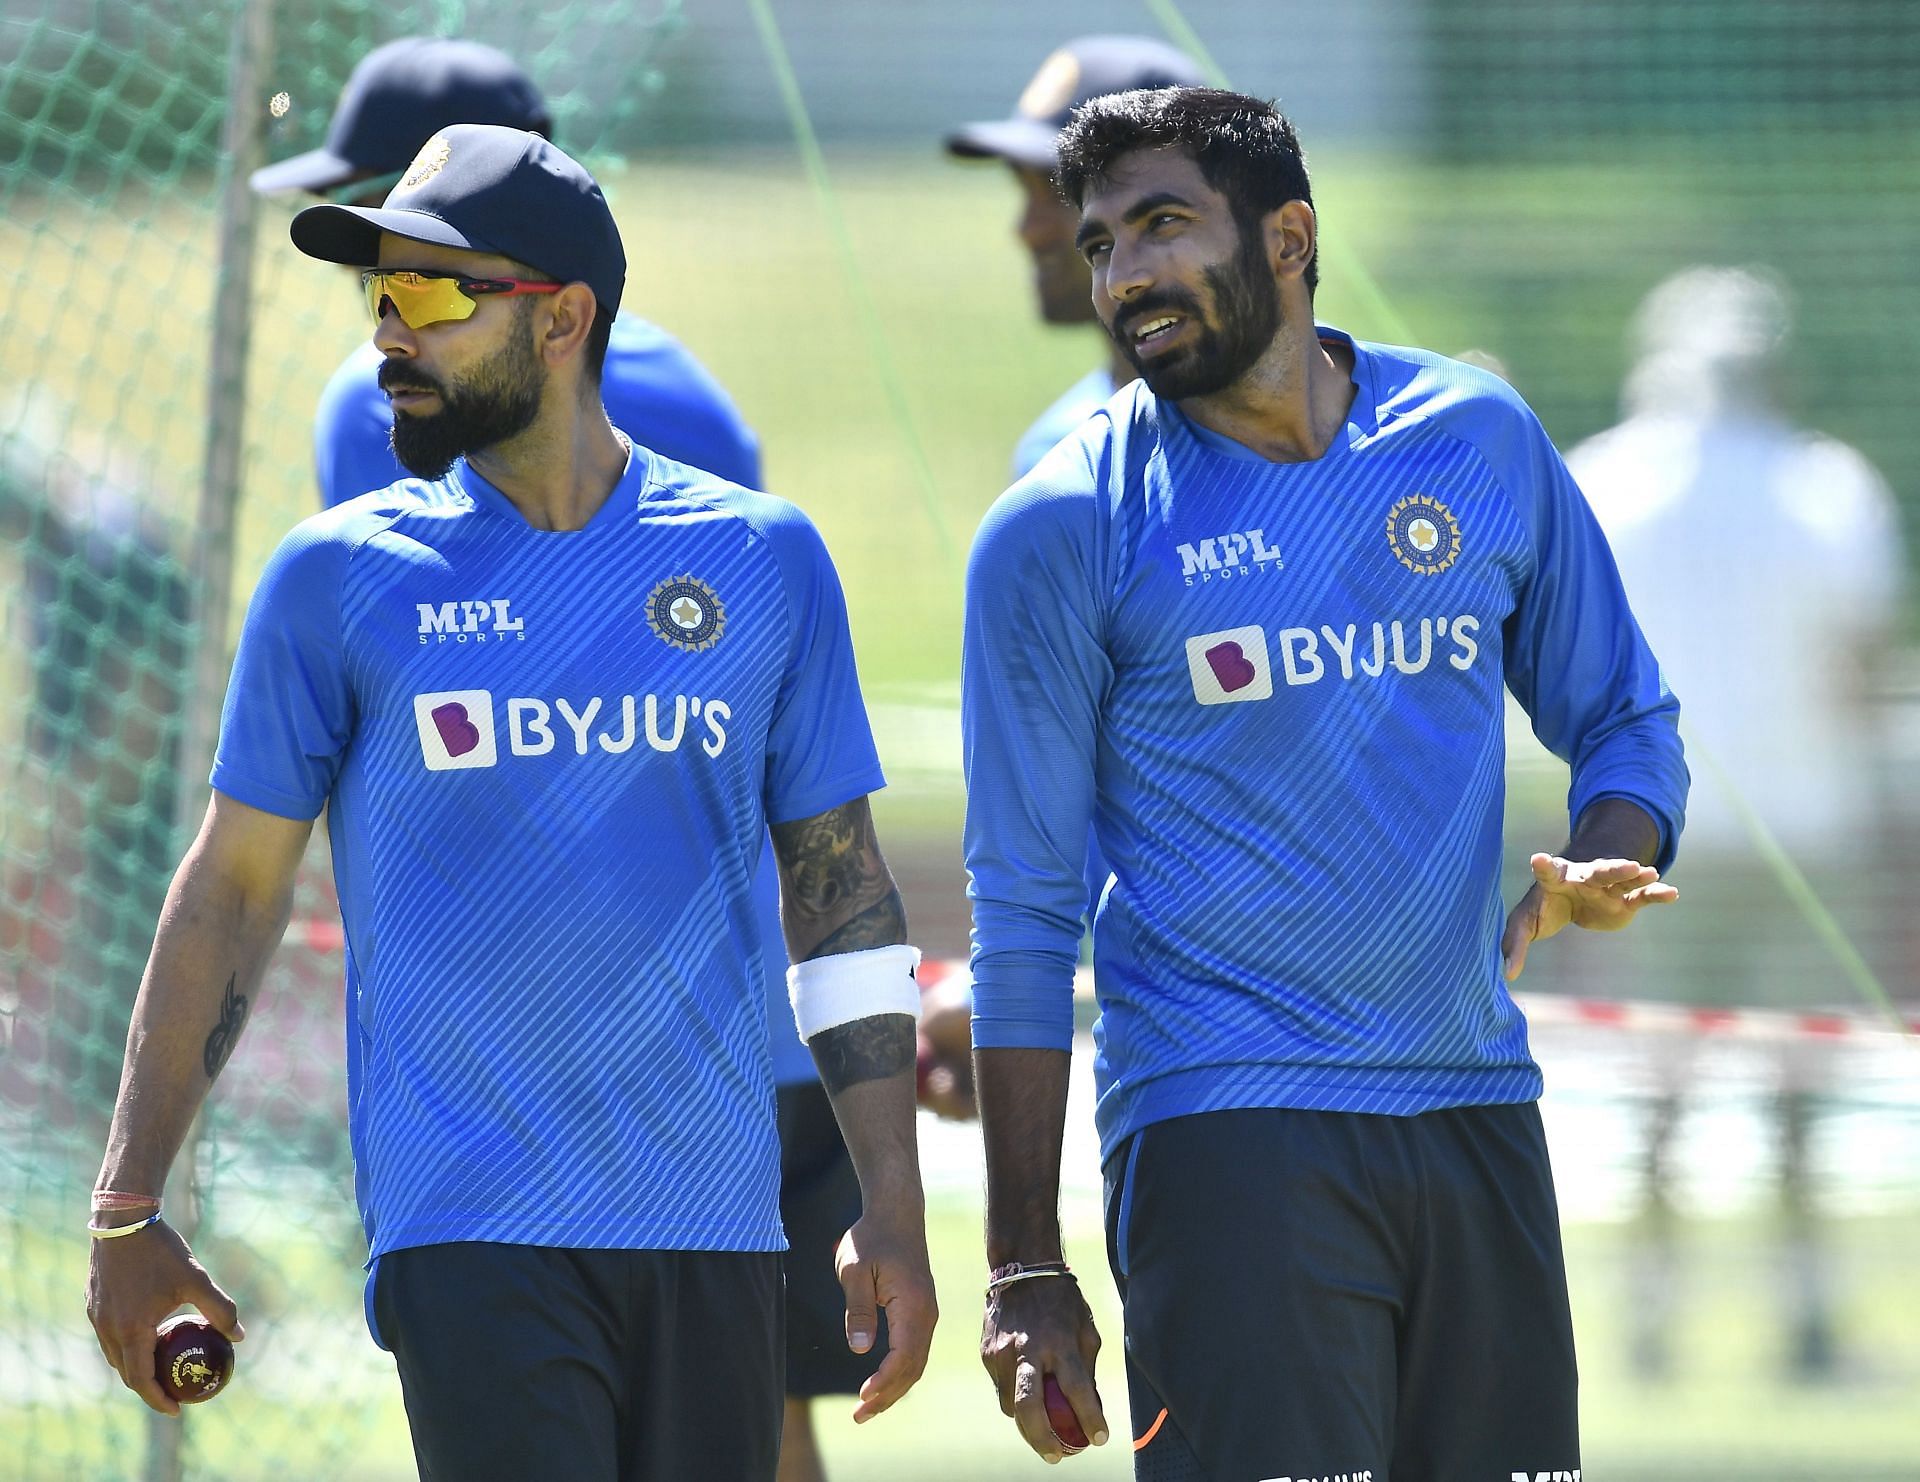 Virat Kohli and Jasprit Bumrah have been rested for the T20I series against South Africa.